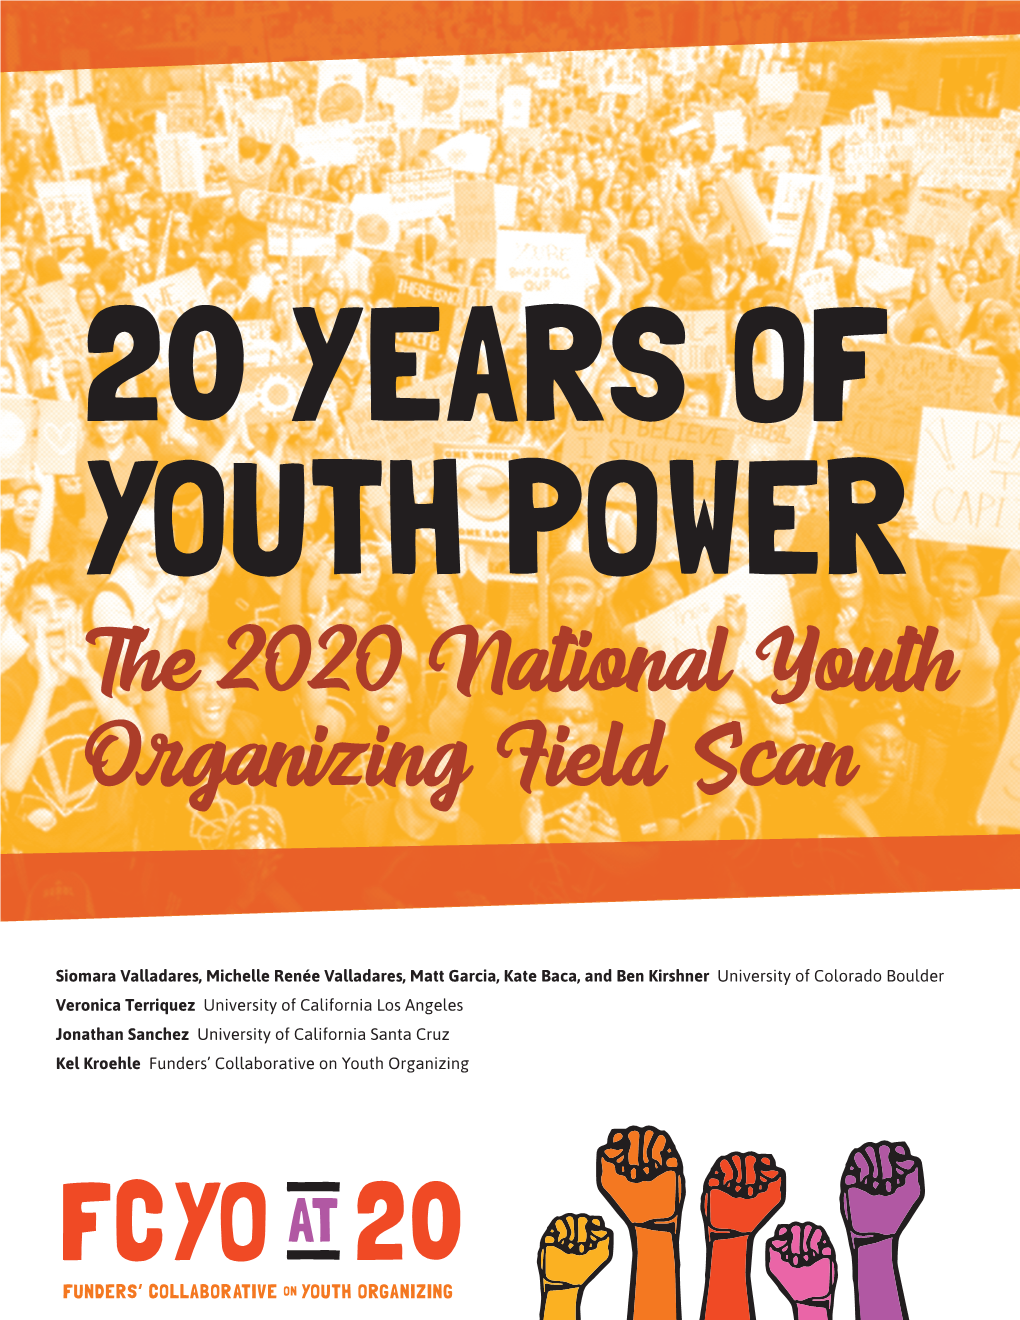 The 2020 National Youth Organizing Field Scan